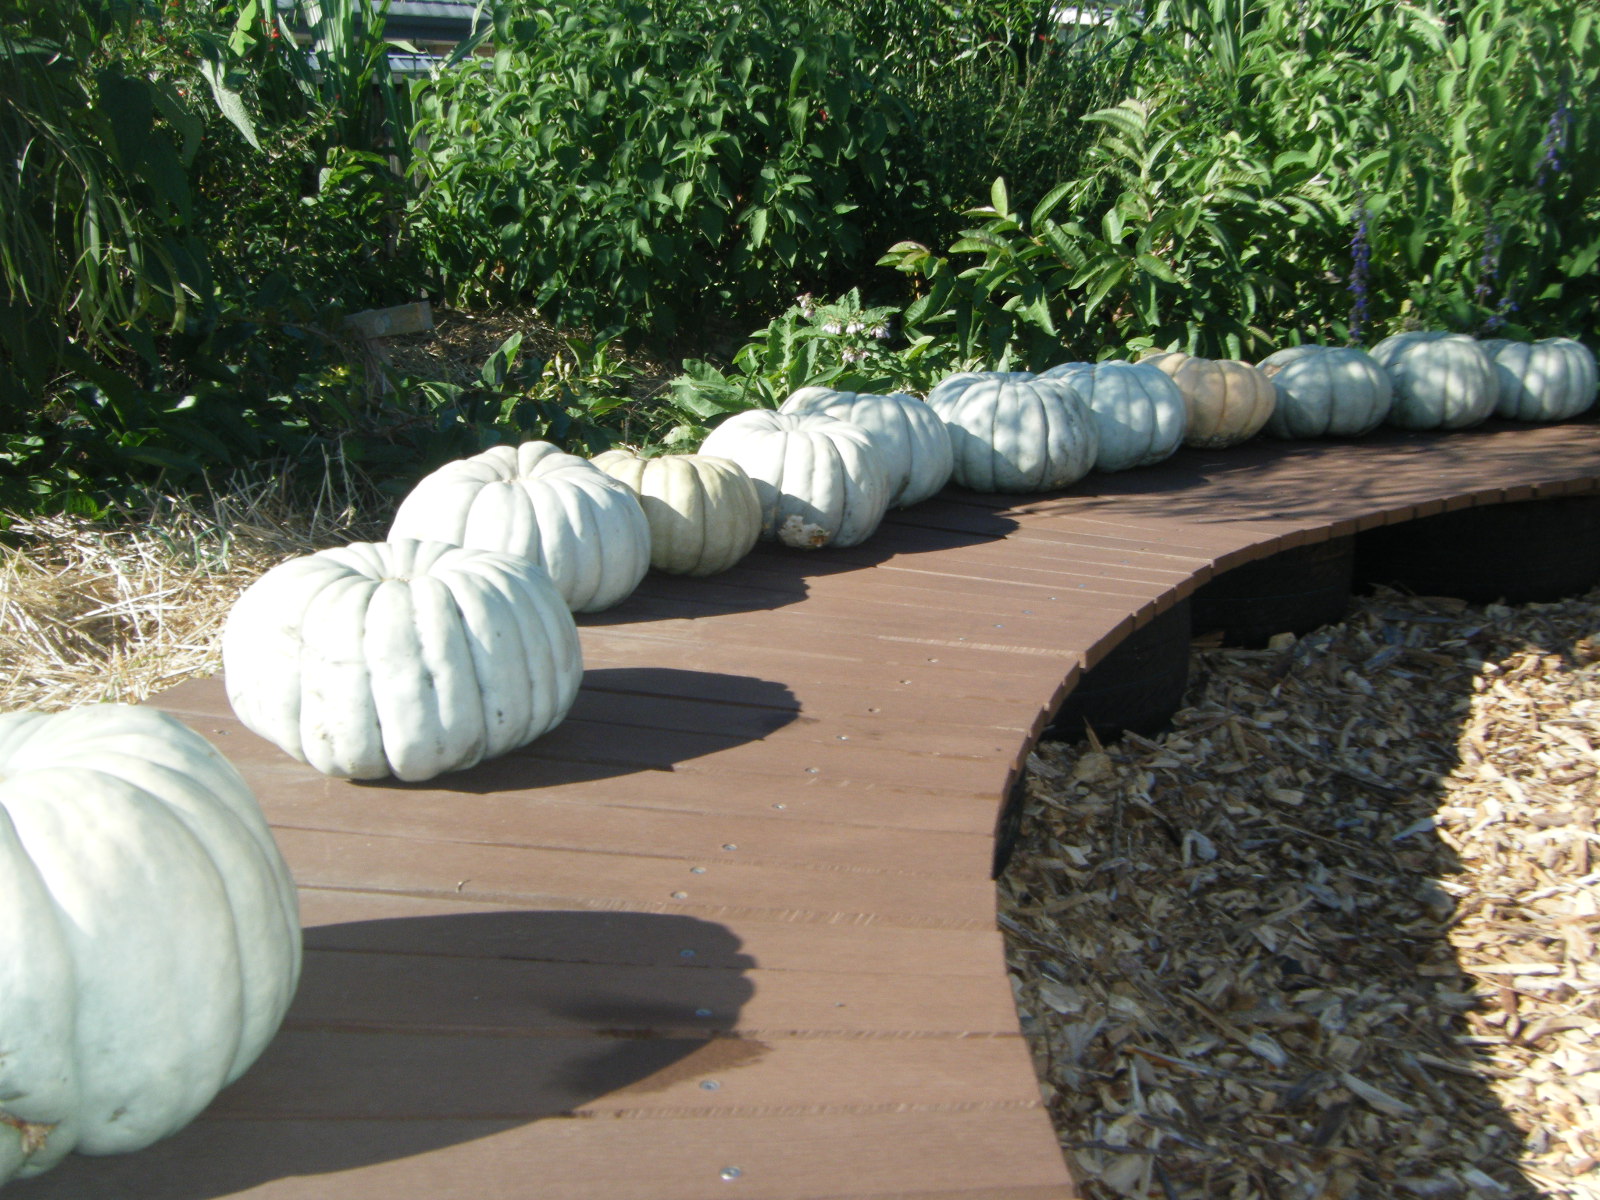 Rows of harvested pumpkins